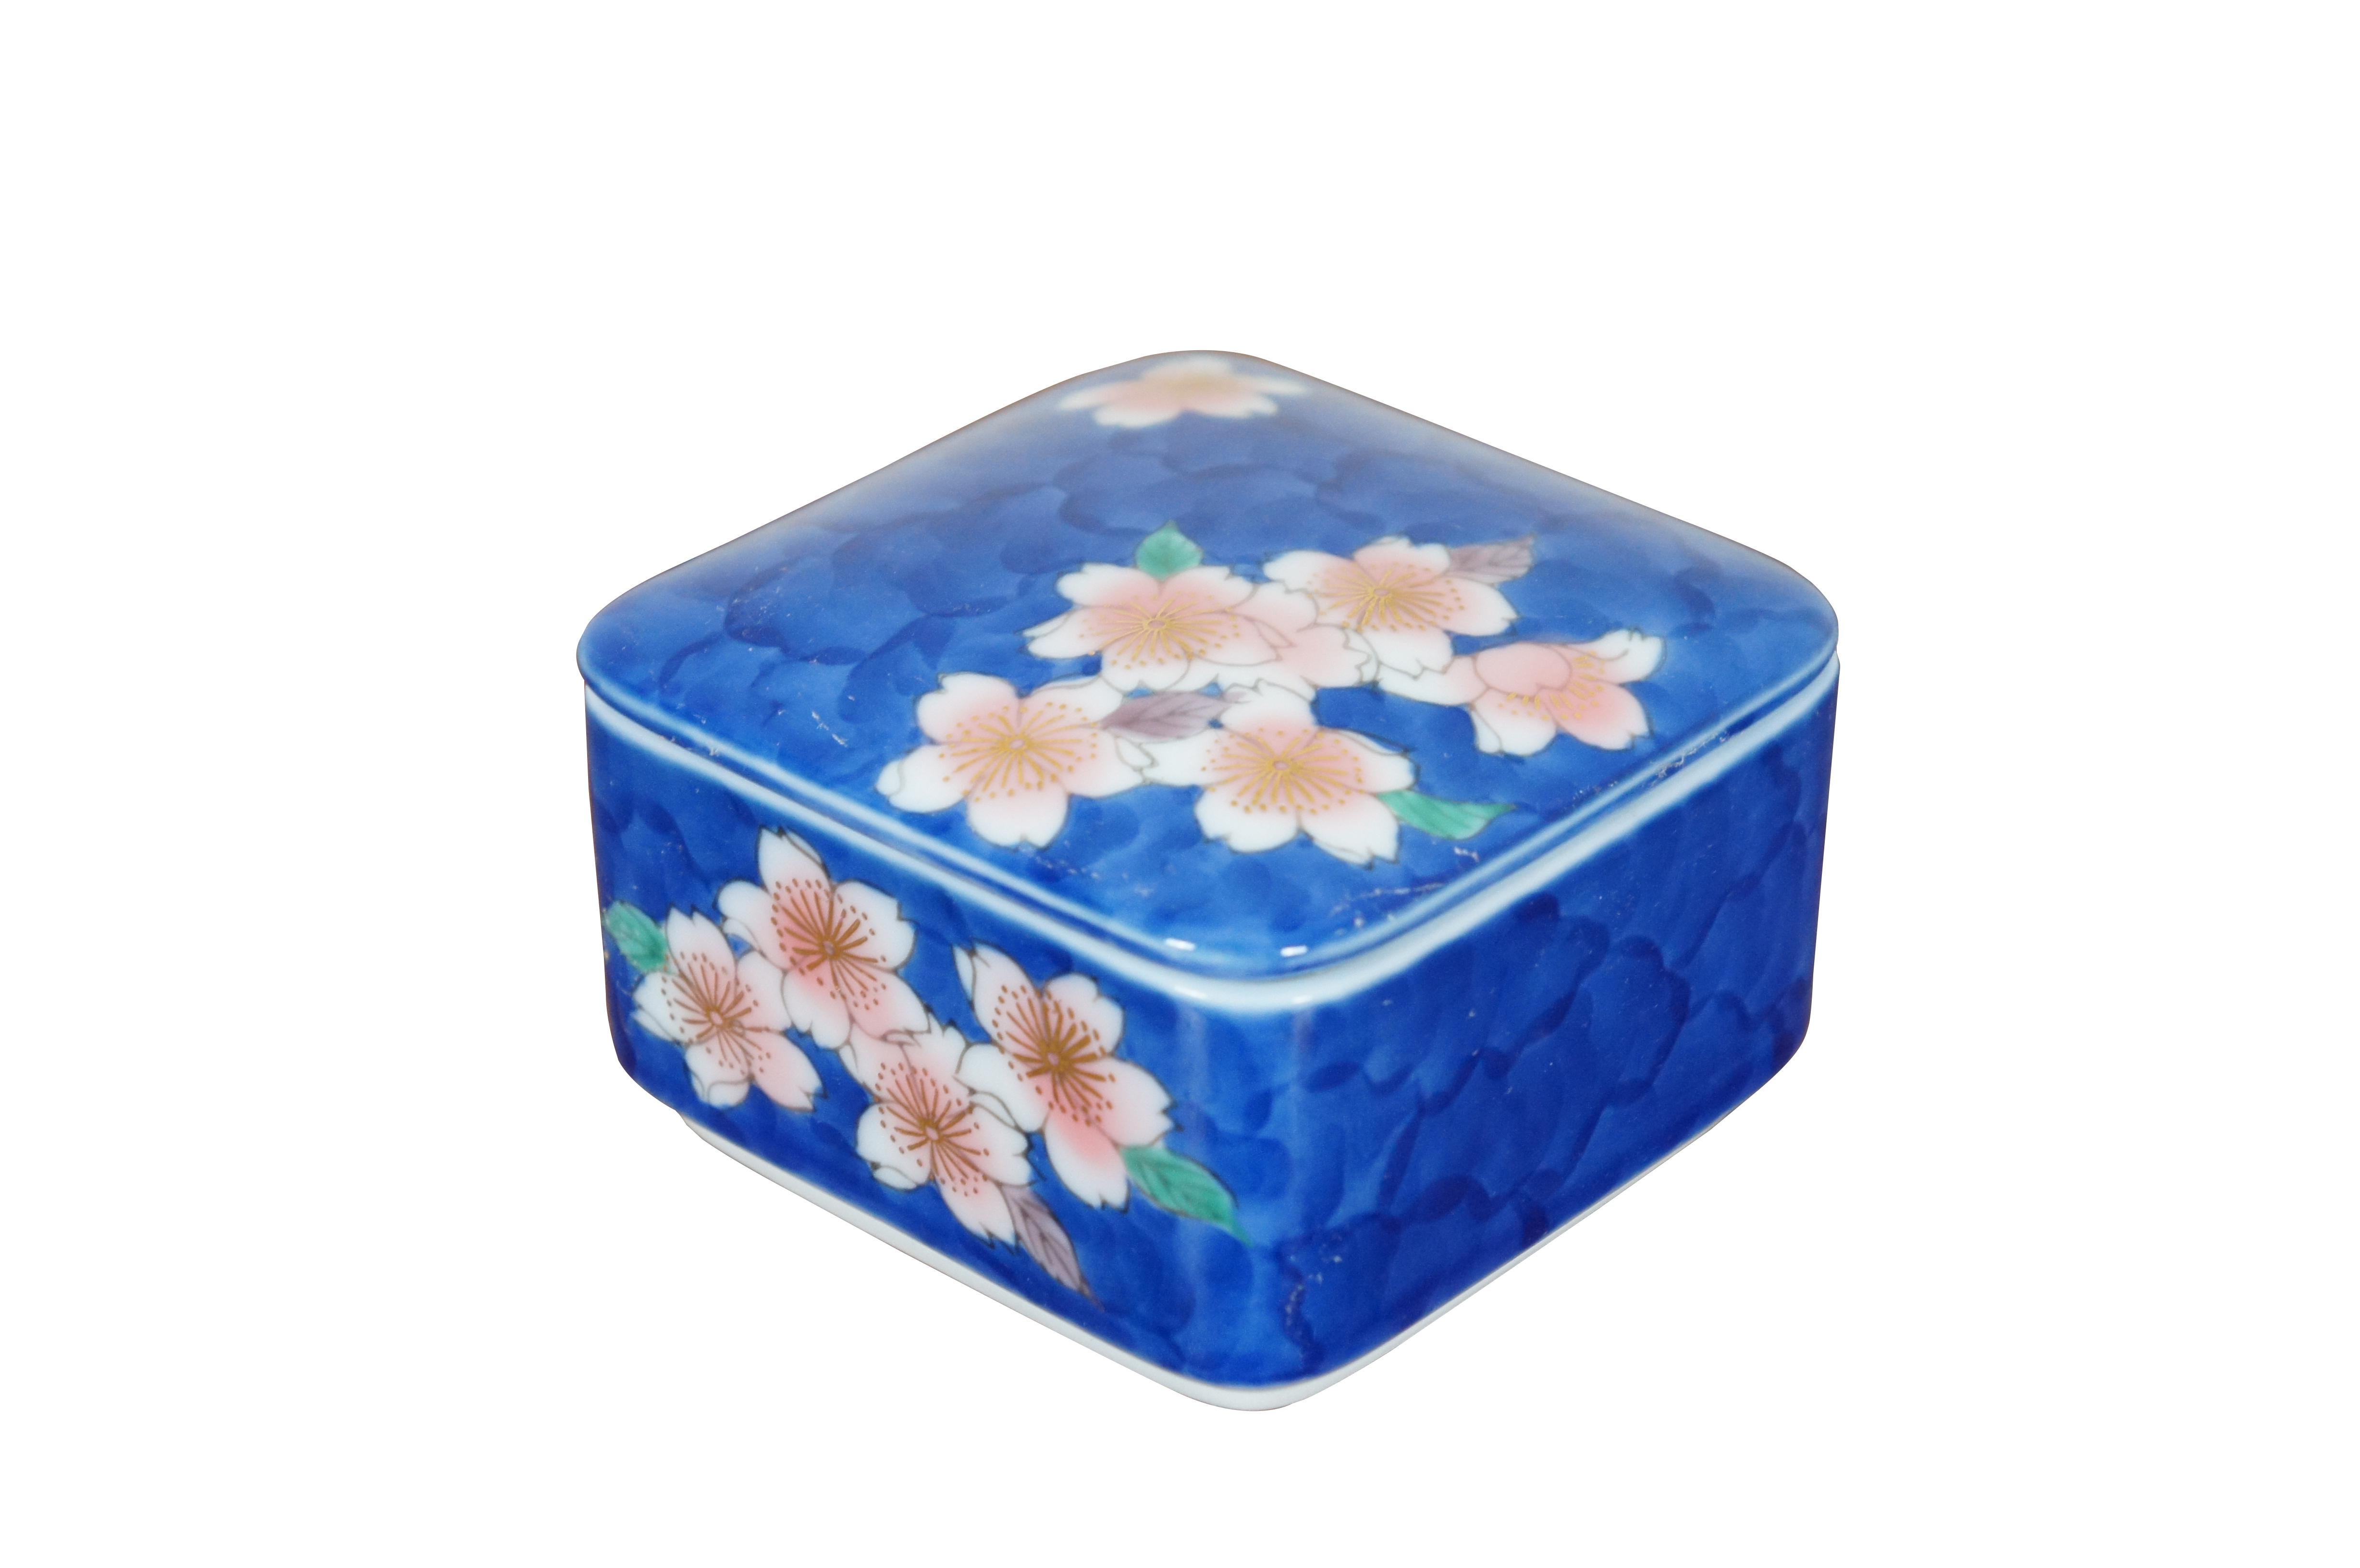 Vintage hand painted porcelain trinket box. Rounded square form with pink water lilies / lotus flowers accented with gold stamens and green leaves on a backdrop of blue water. Mark used circa 1900-1920.

